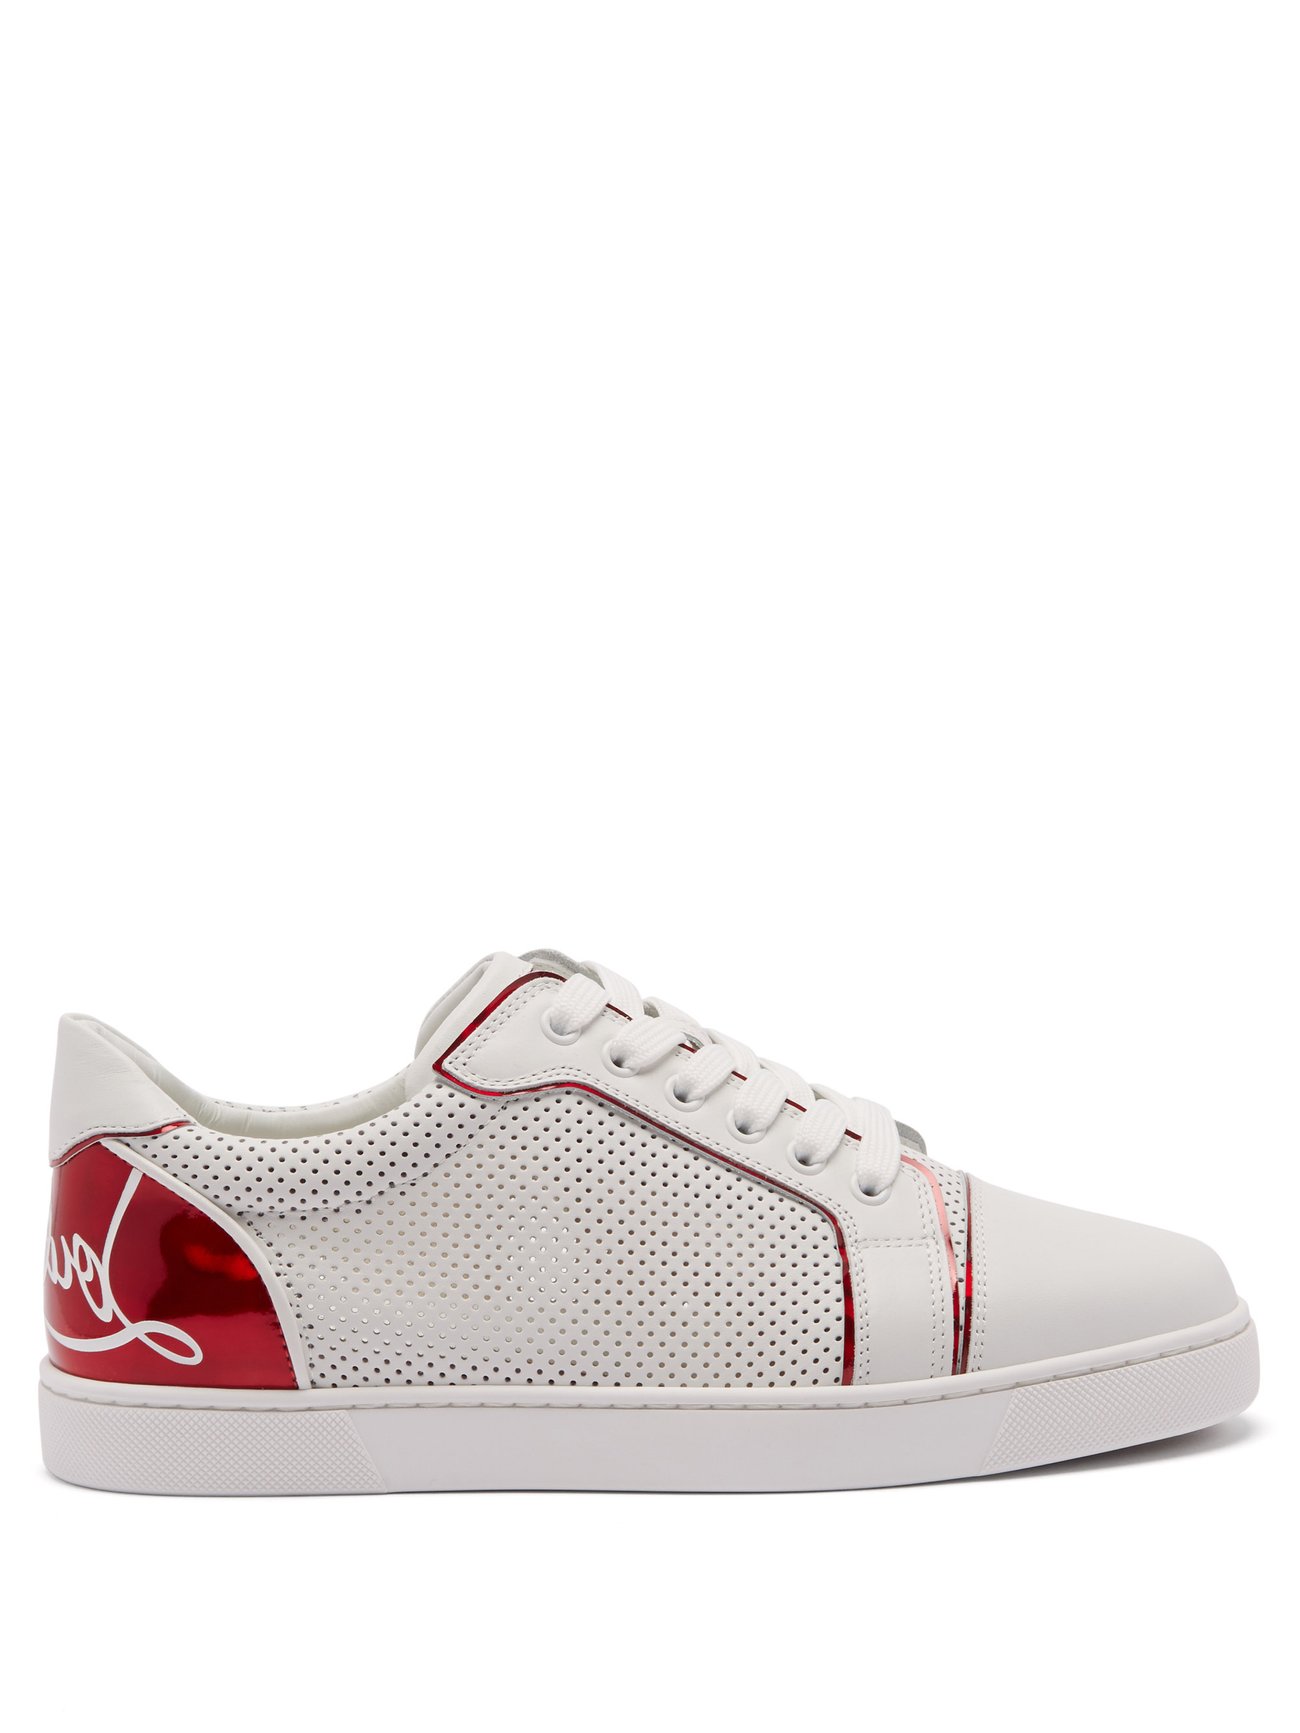 Christian Louboutin Men's Swarovski Crystal Red Suede Mid-Top Sneaker – The  Dressing Room